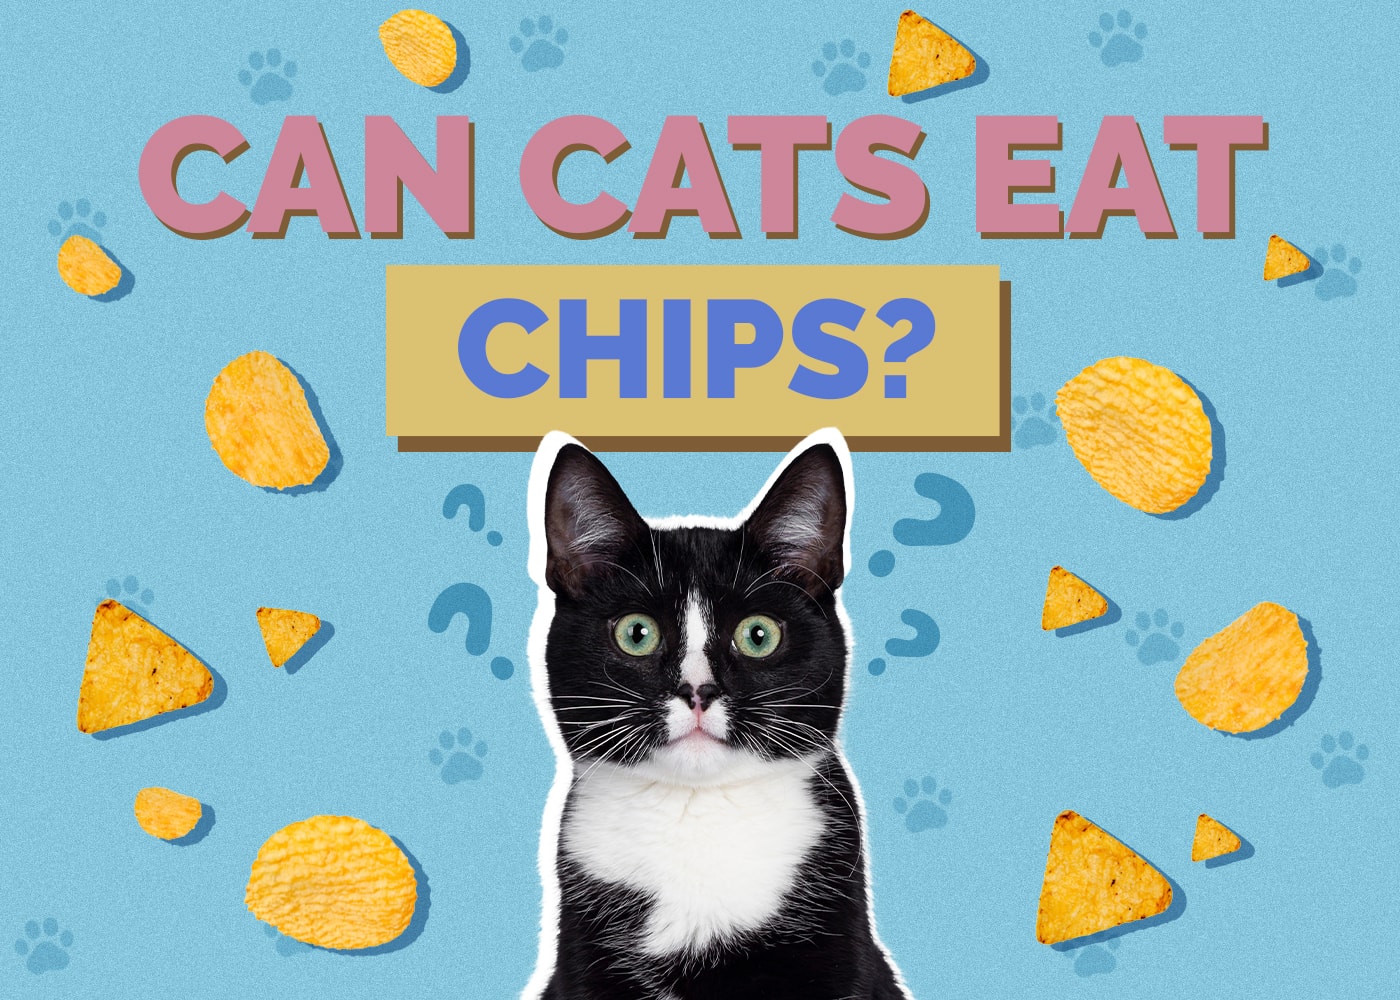 Can Cats Eat chips